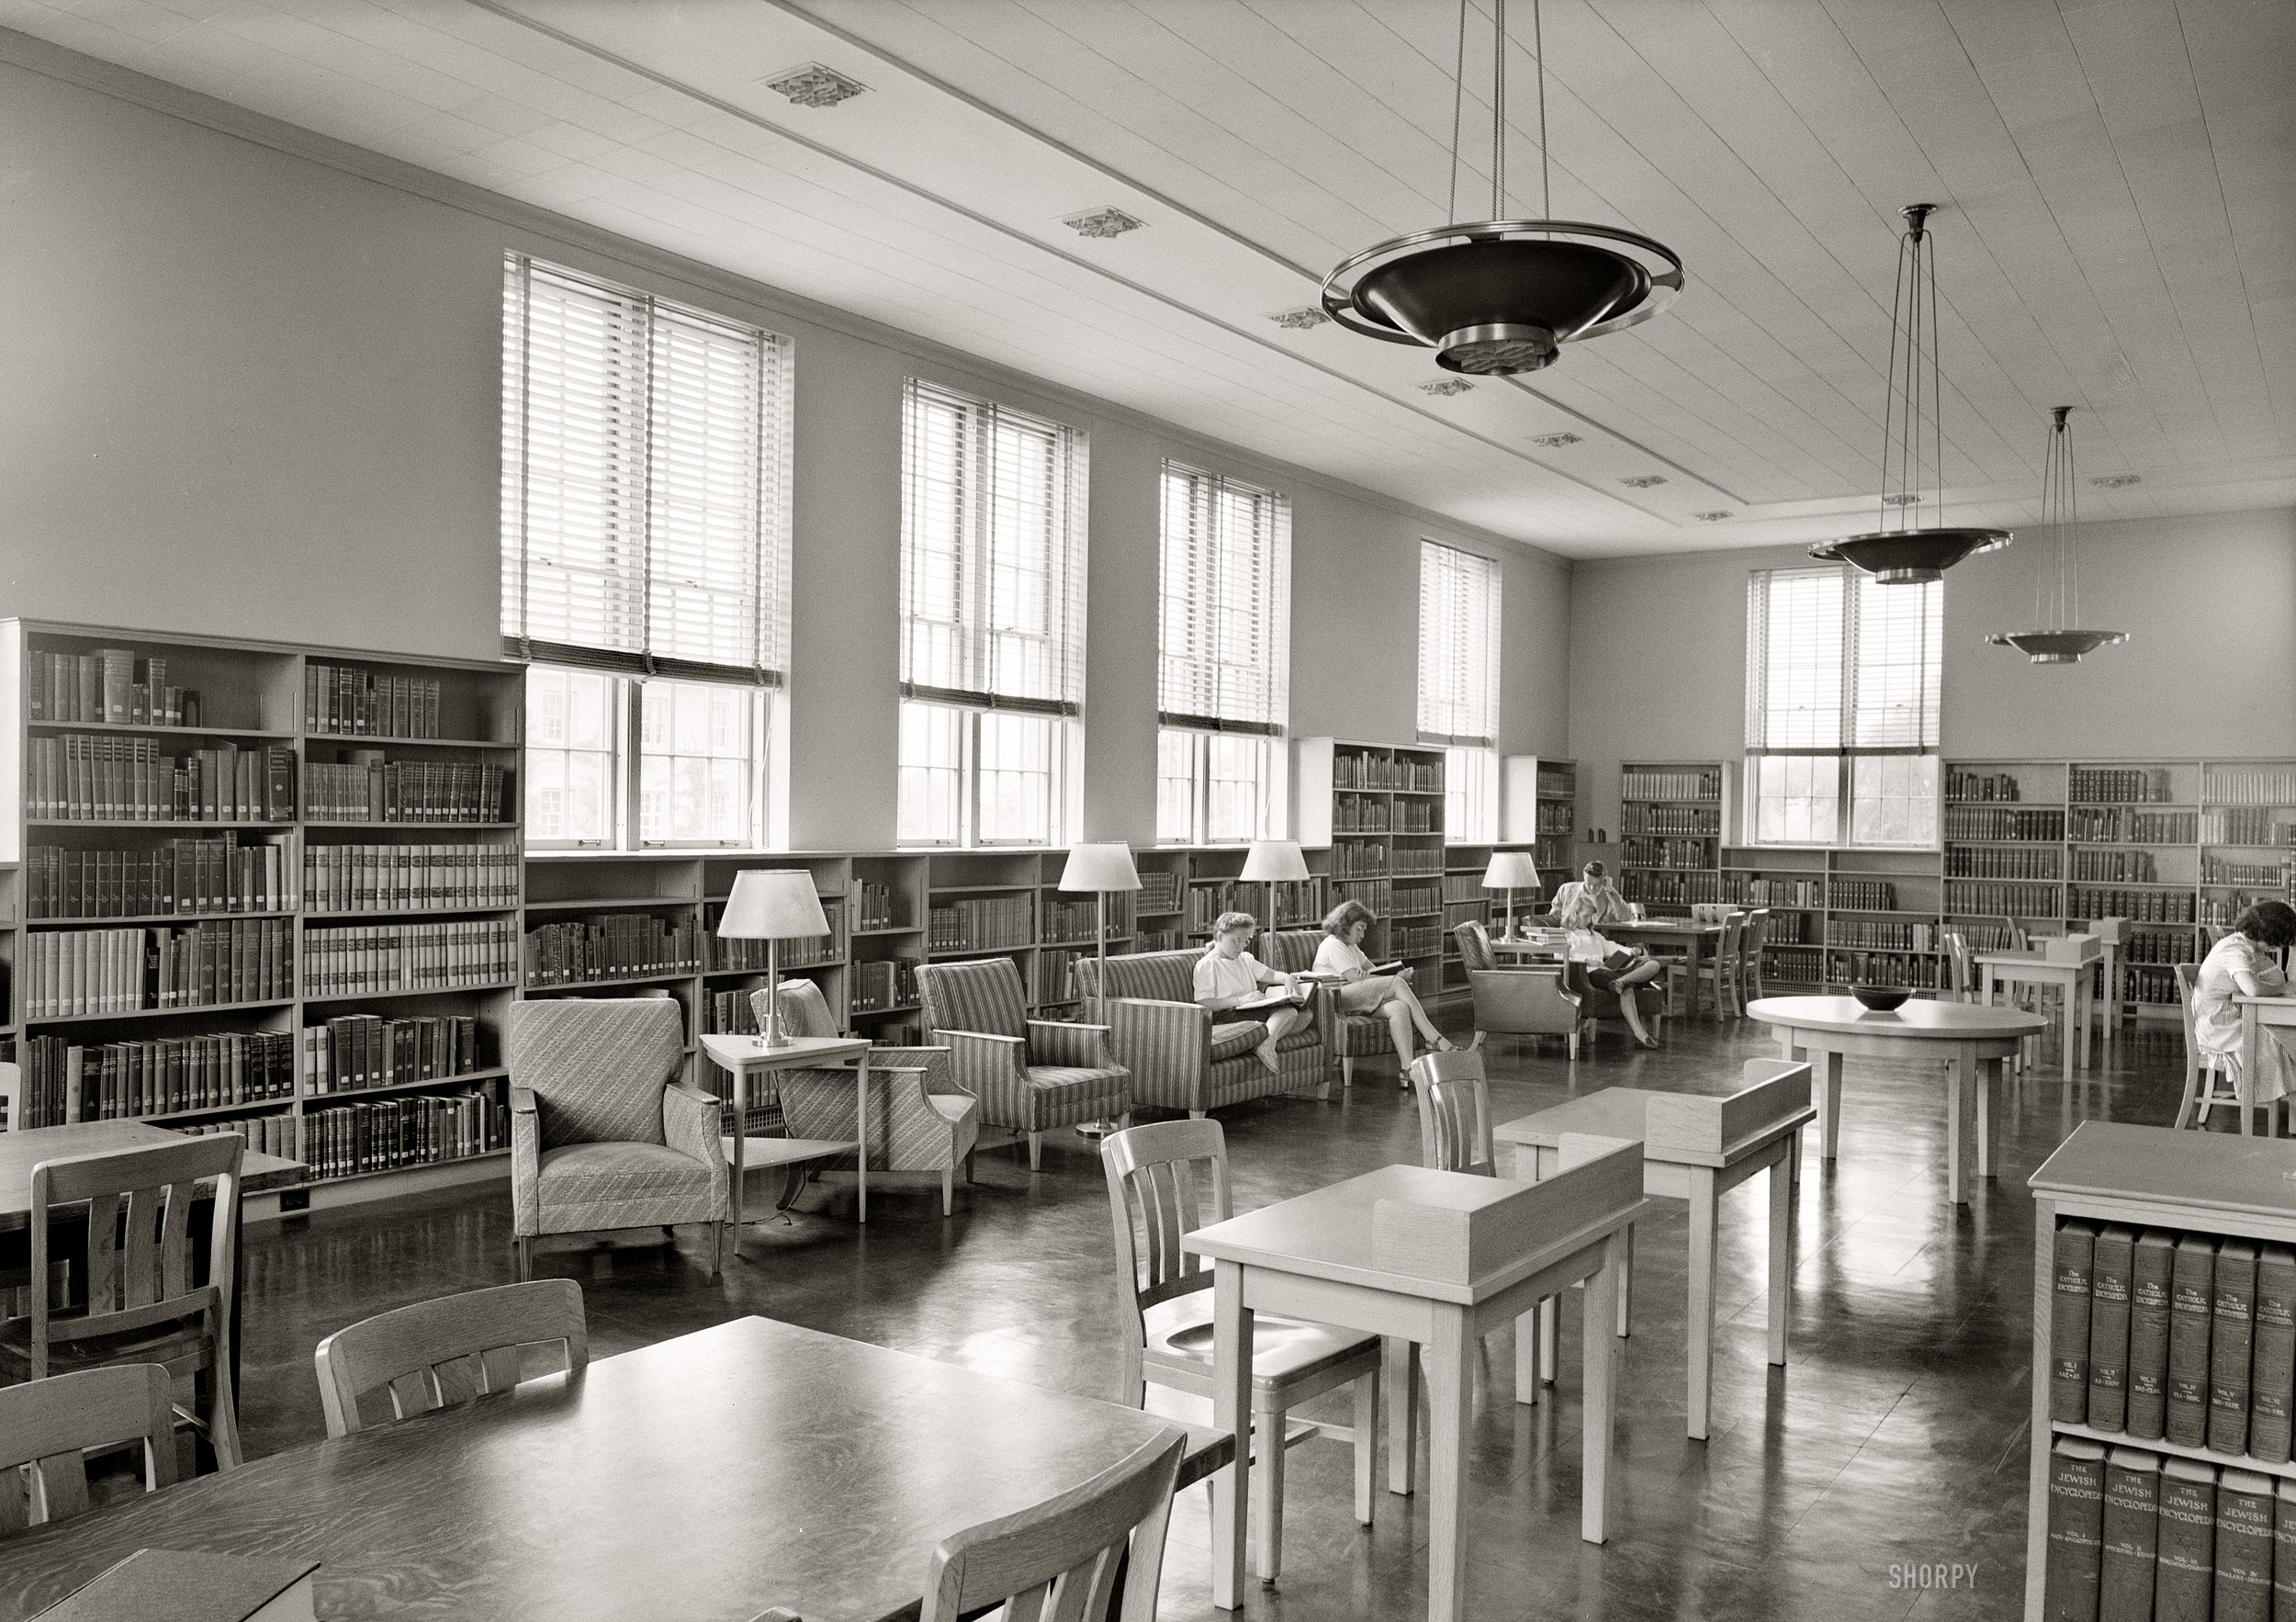 June 29, 1944. "Connecticut College for Women, New London. Palmer Library reading room." 5x7 safety negative by Gottscho-Schleisner. View full size.